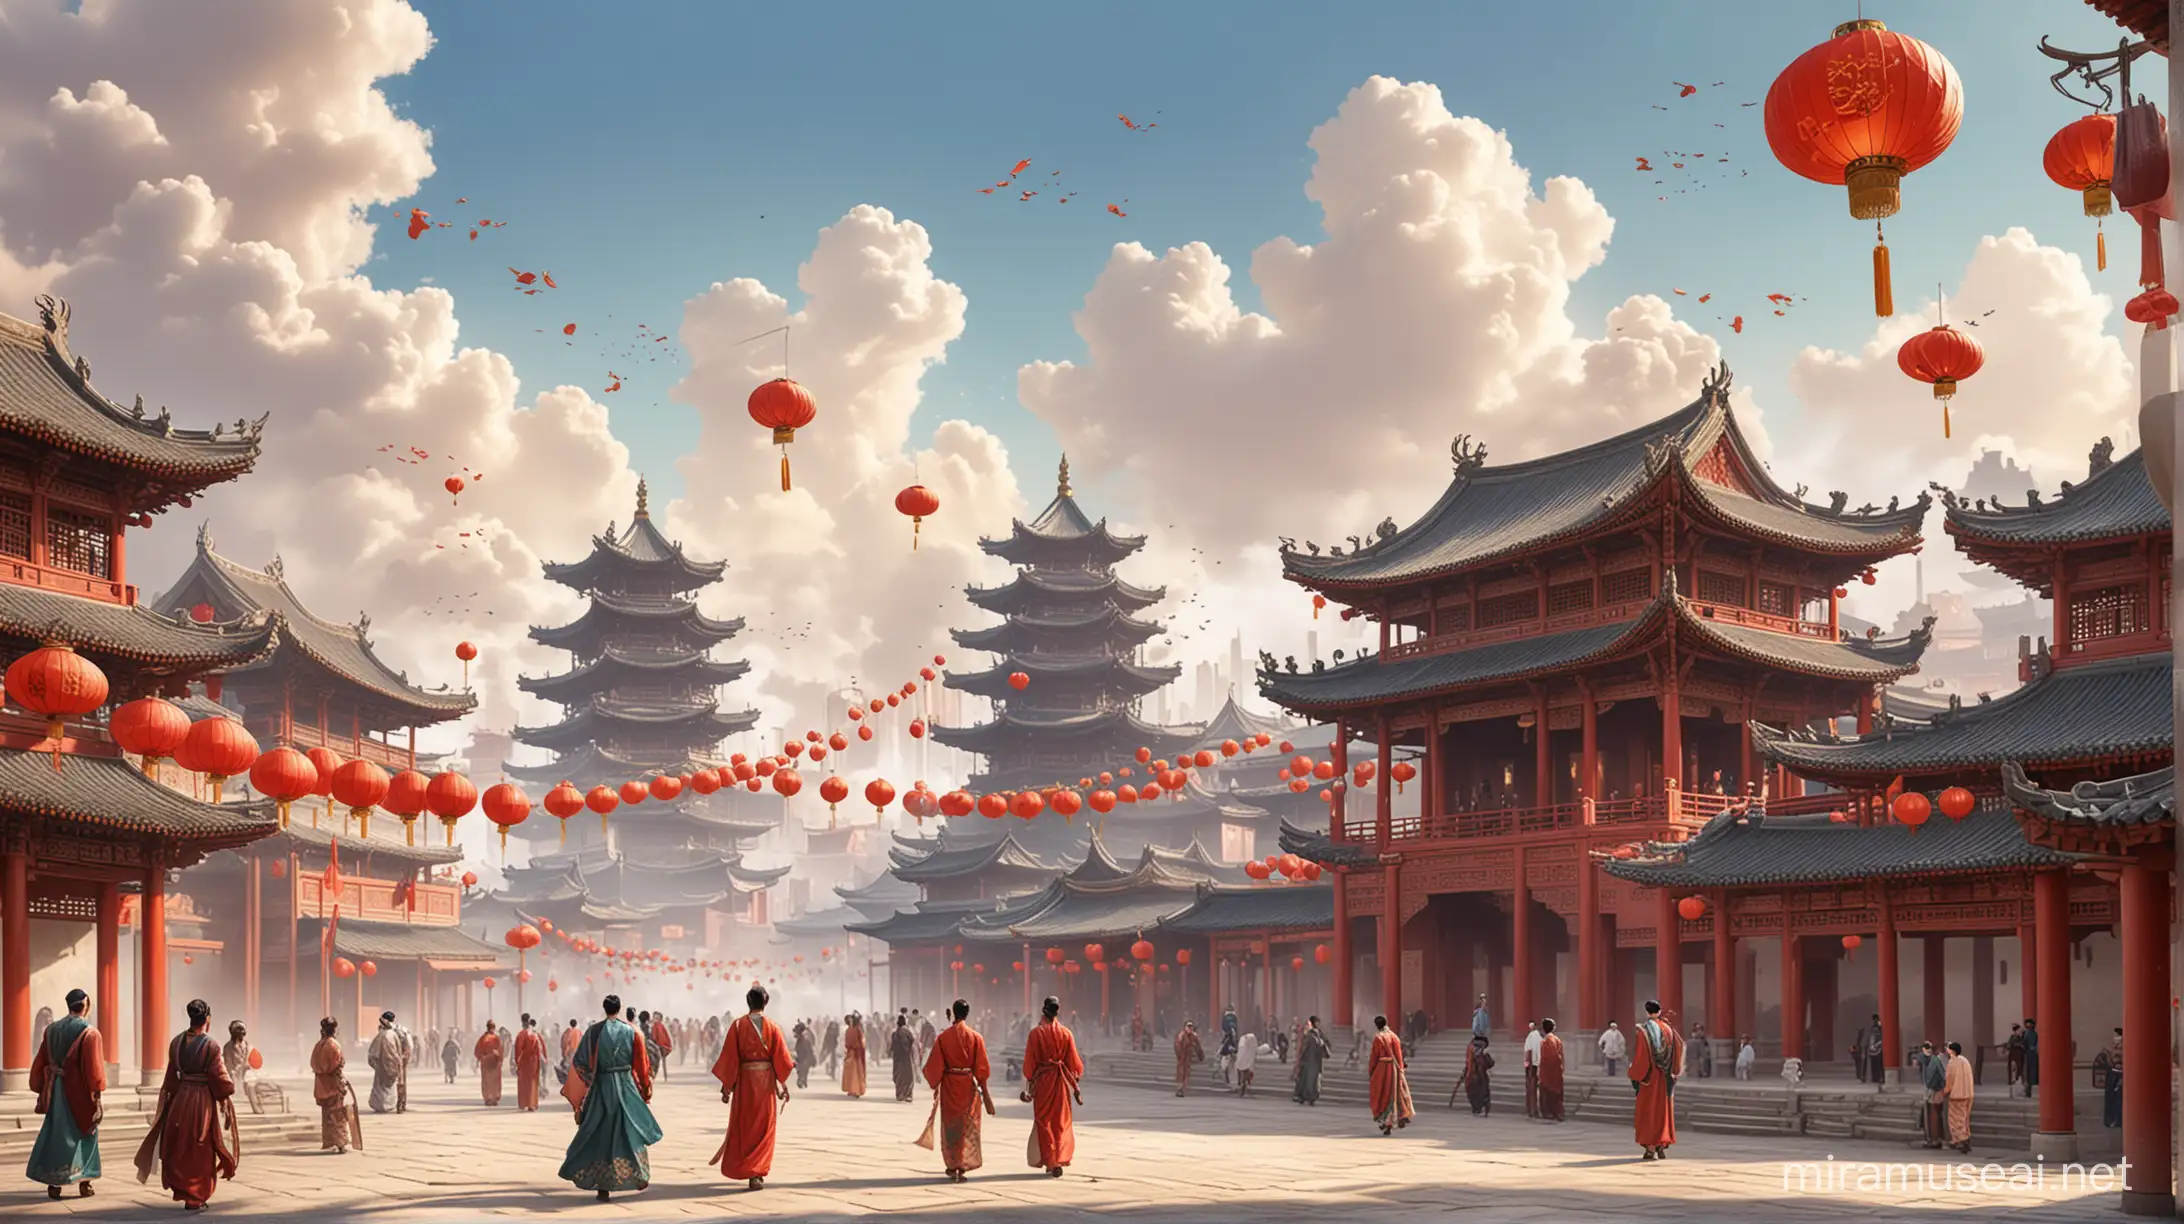 Chinese Urban Scenery Ancient Architecture and Modern Illustrations